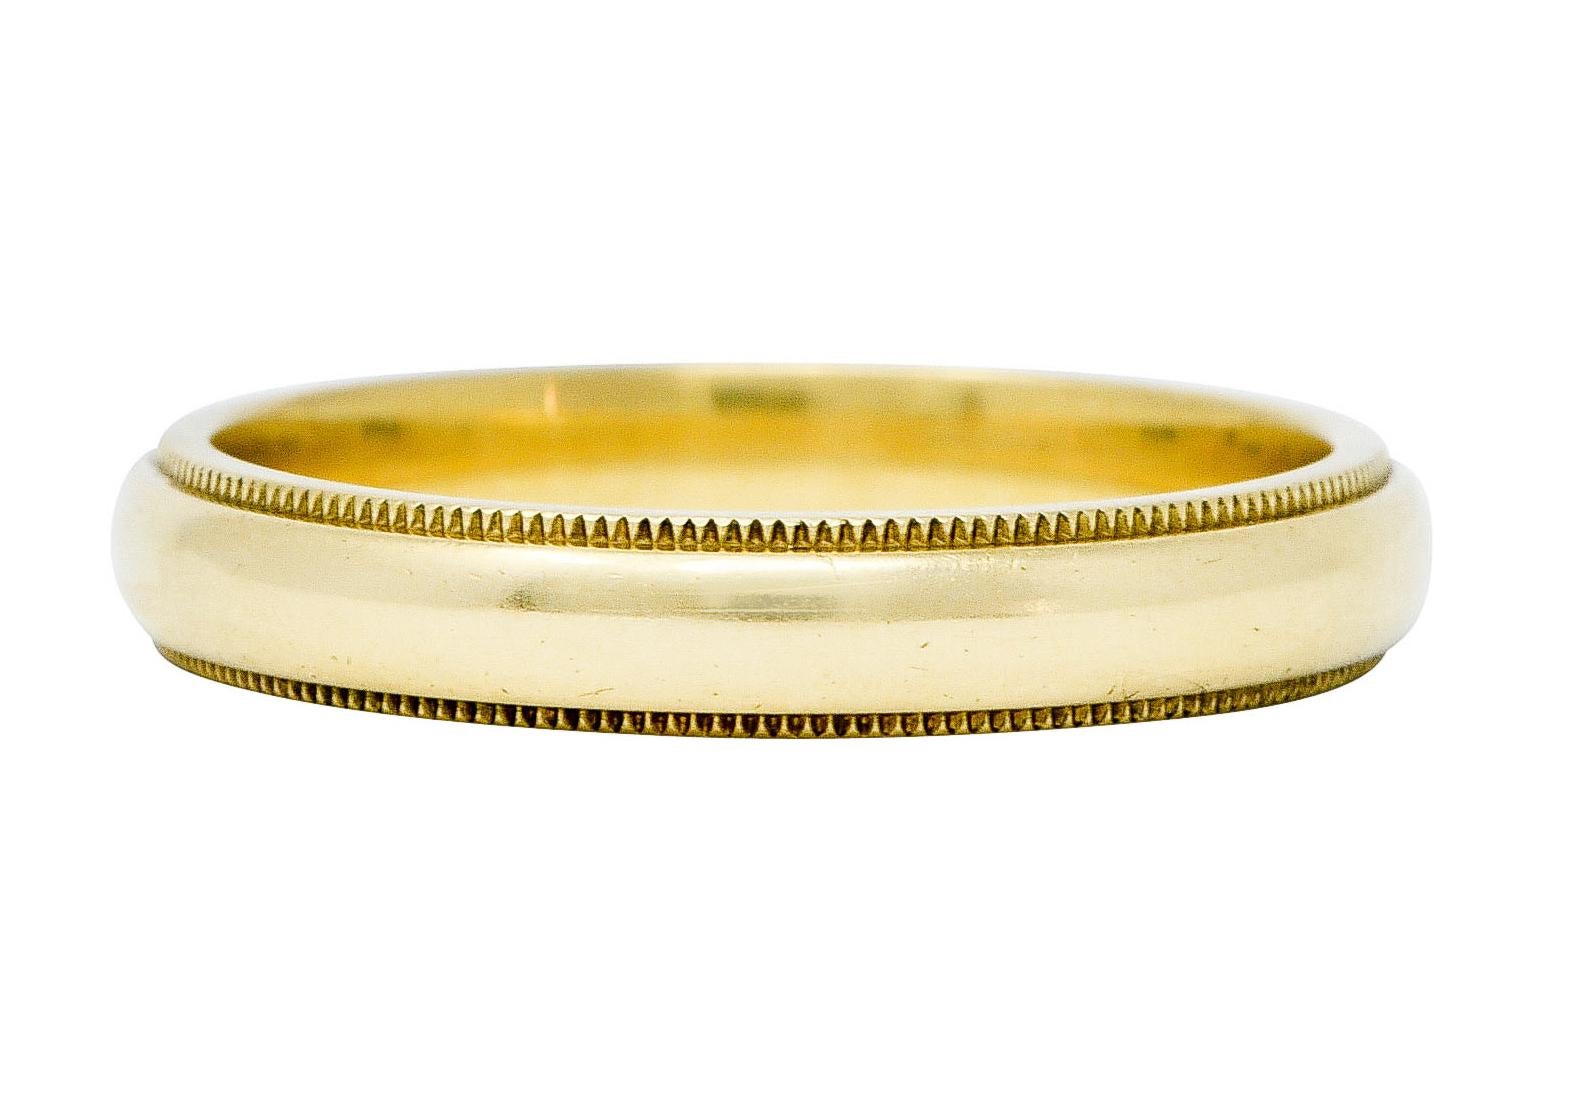 Designed as a gold band ring edged with milgrain

Stamped 750 for 18 karat gold

Fully signed Tiffany & Co.

Circa: 1980s

Ring Size: 10 1/4 & sizable

Measures North to South 4.0 mm and sits 2.0 mm high

Total weight: 6.7 grams

Timeless. Enduring.